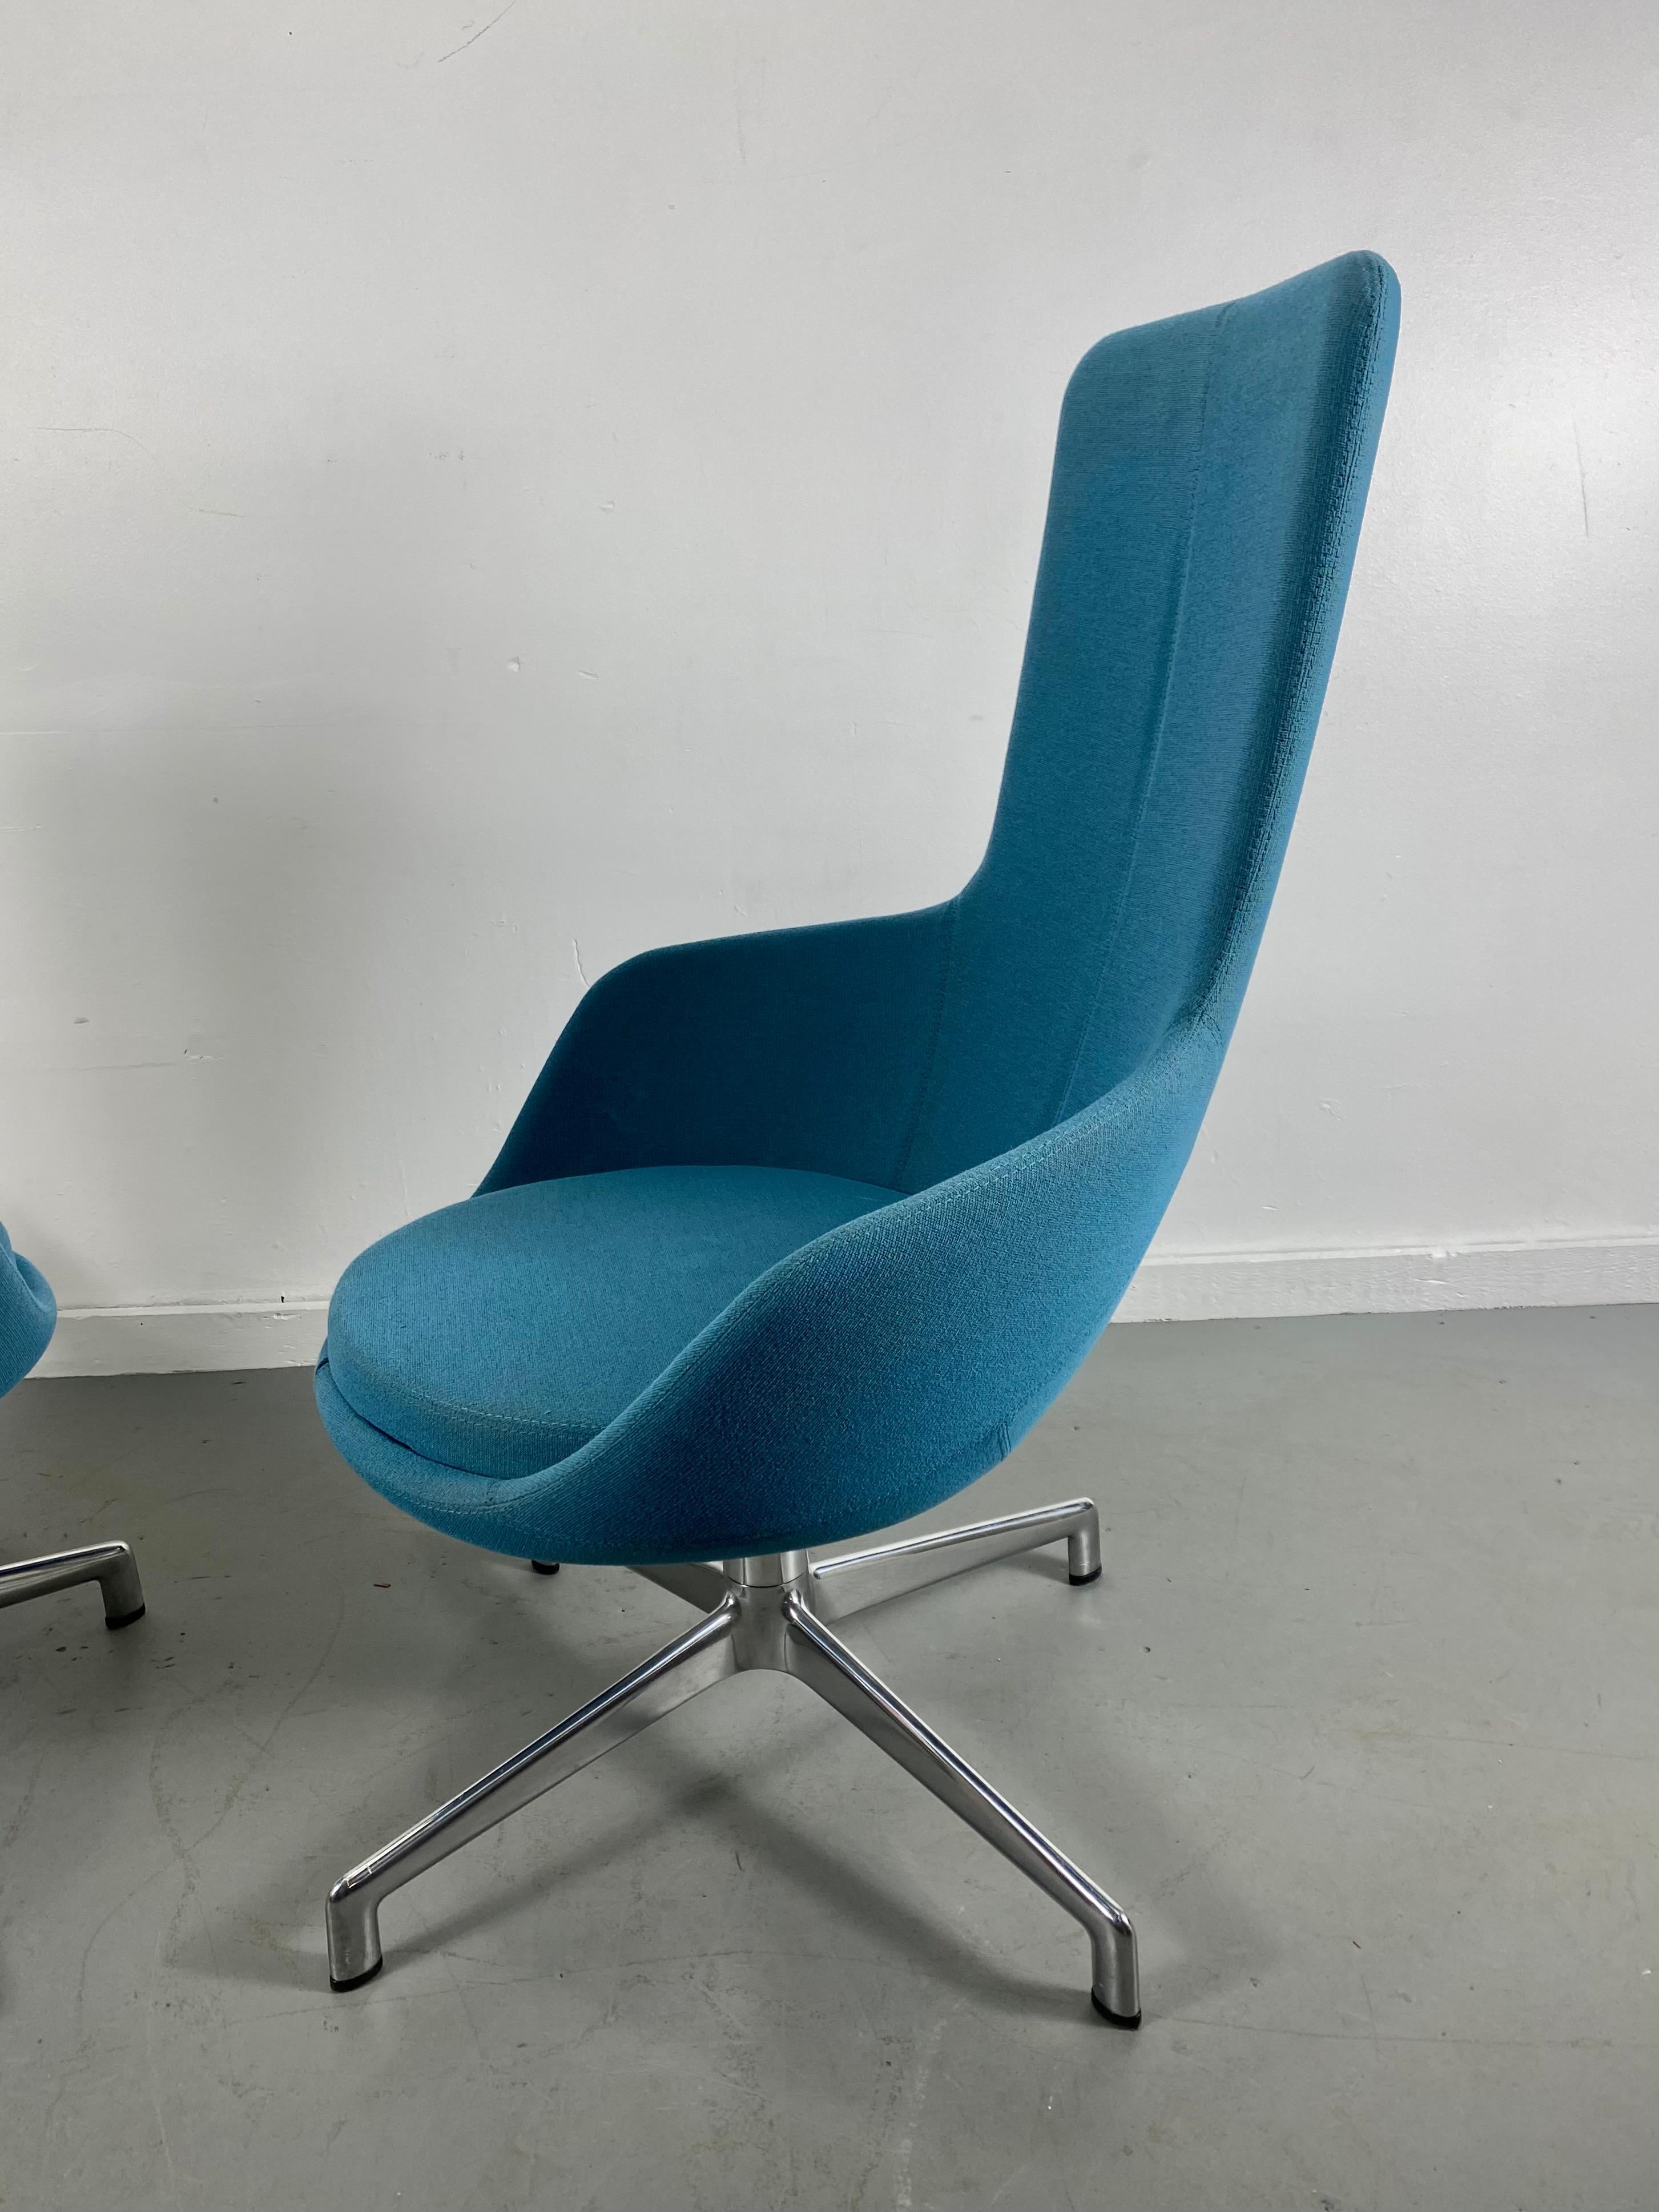 Contemporary Pair of Post Modernist Lounge Chairs, Juxta Chair by Keilhauer